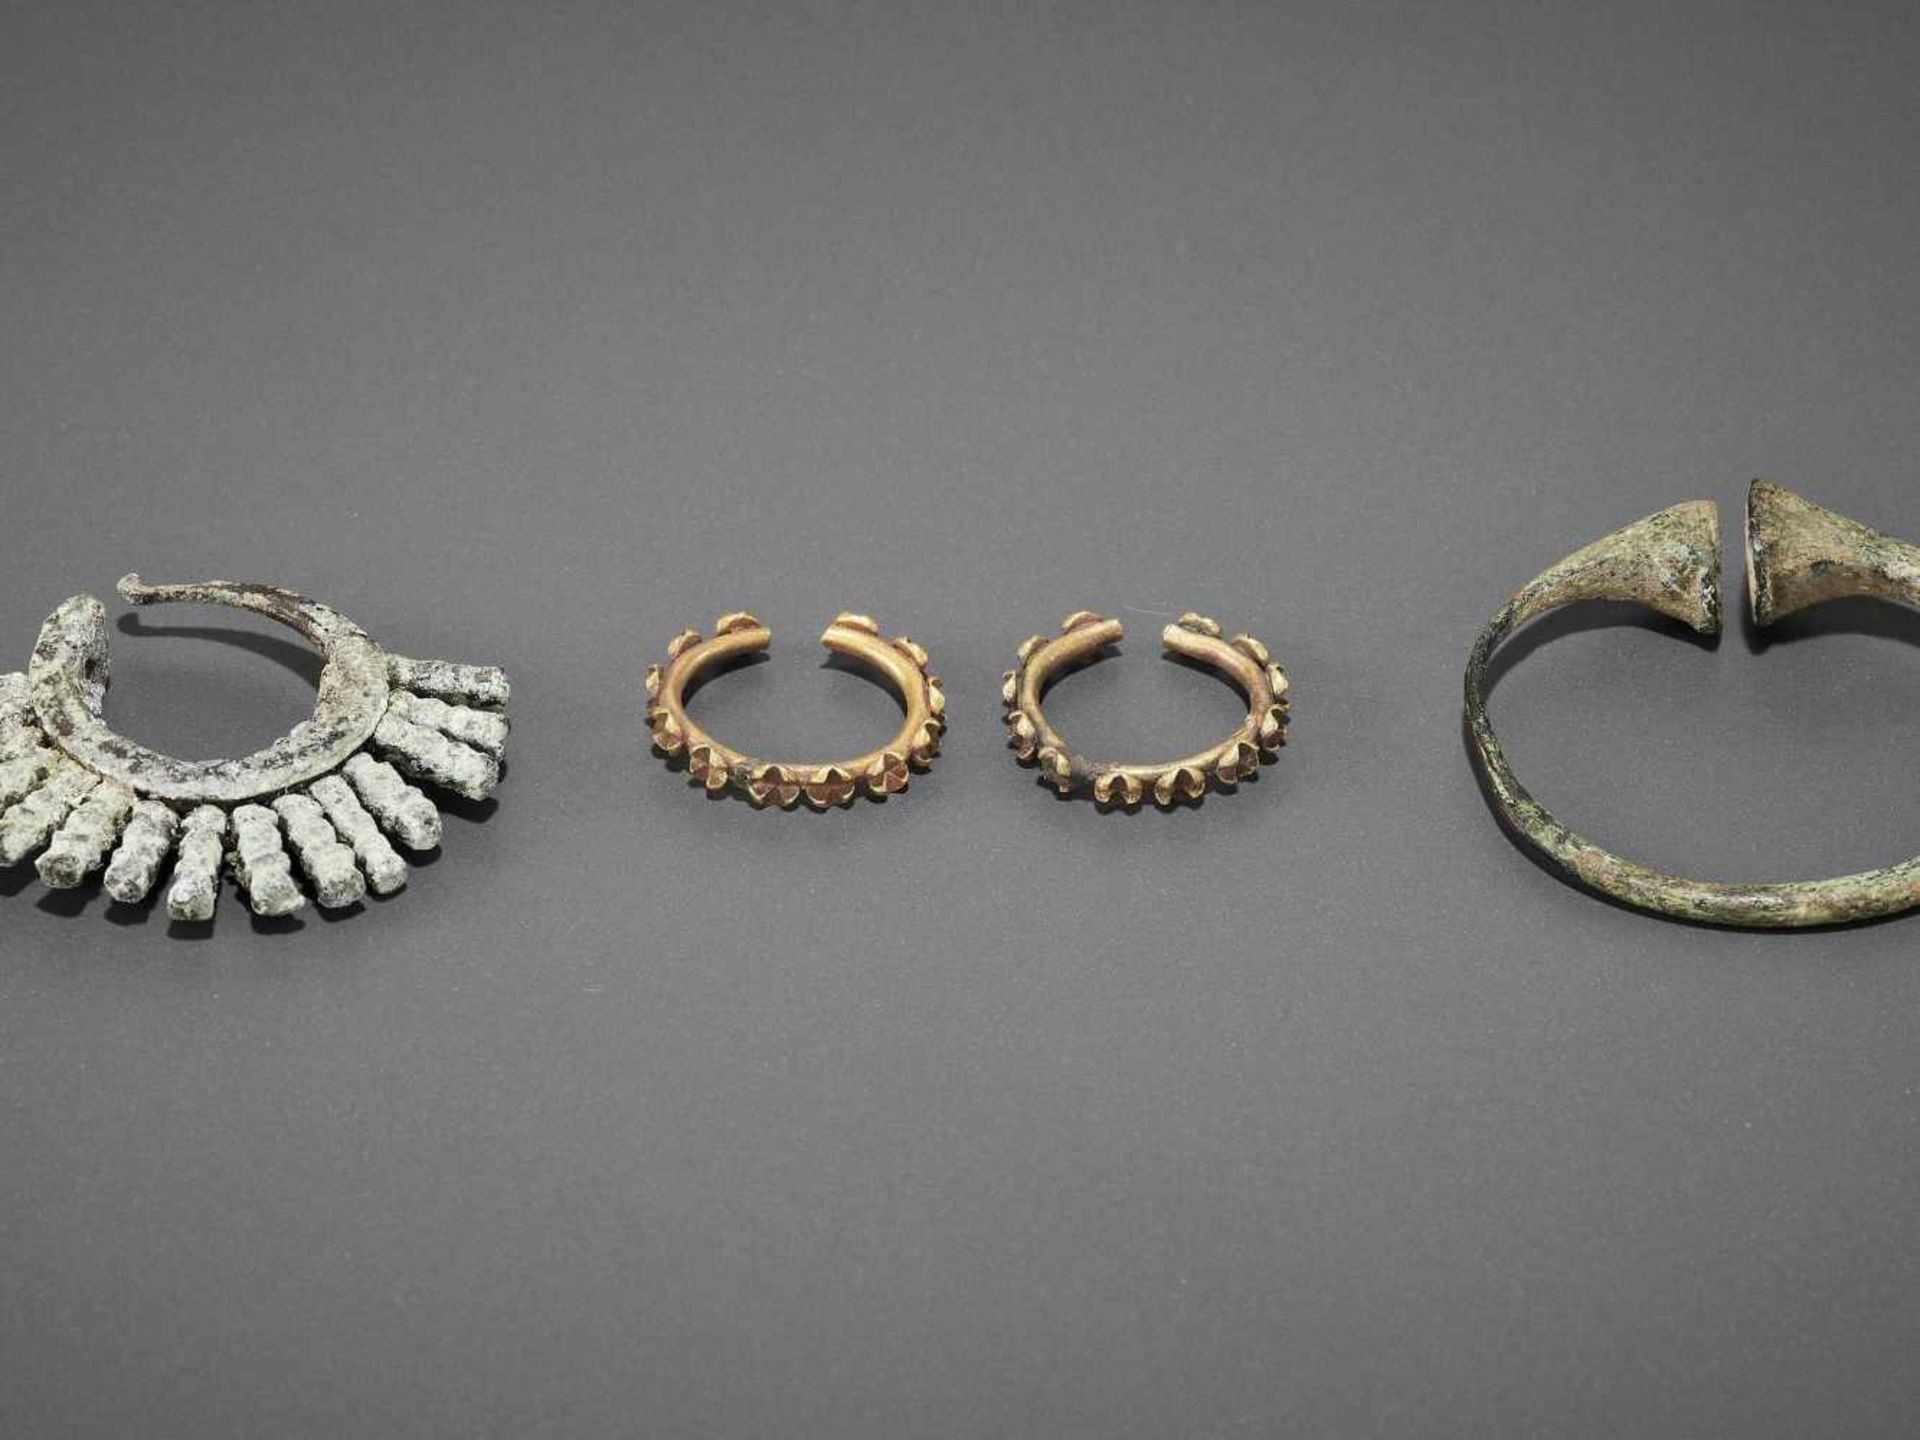 FIVE BACTRIAN GOLD AND BRONZE EARRINGS - Image 6 of 6